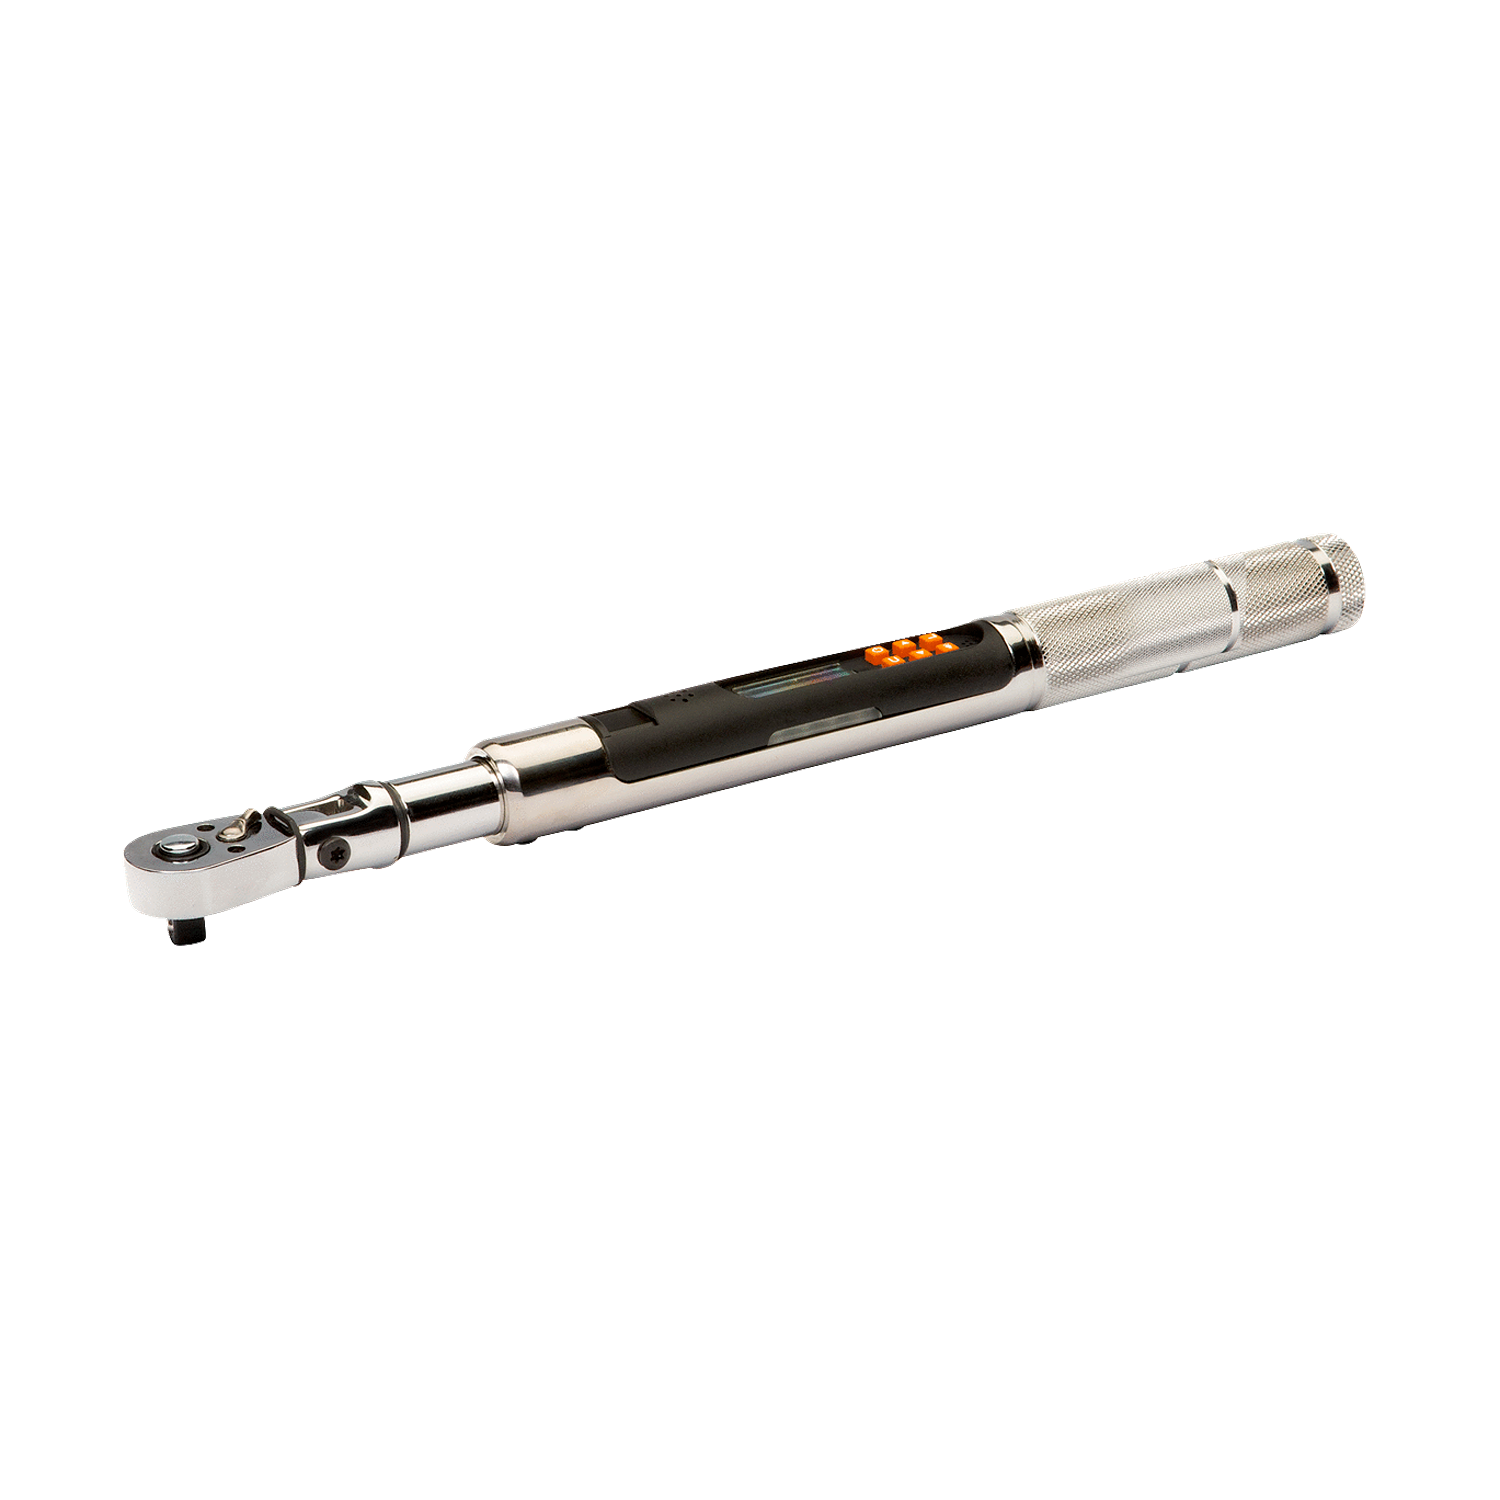 BAHCO TAWM MICRO Electronic Torque Wrench (BAHCO Tools) - Premium Torque Wrench from BAHCO - Shop now at Yew Aik.